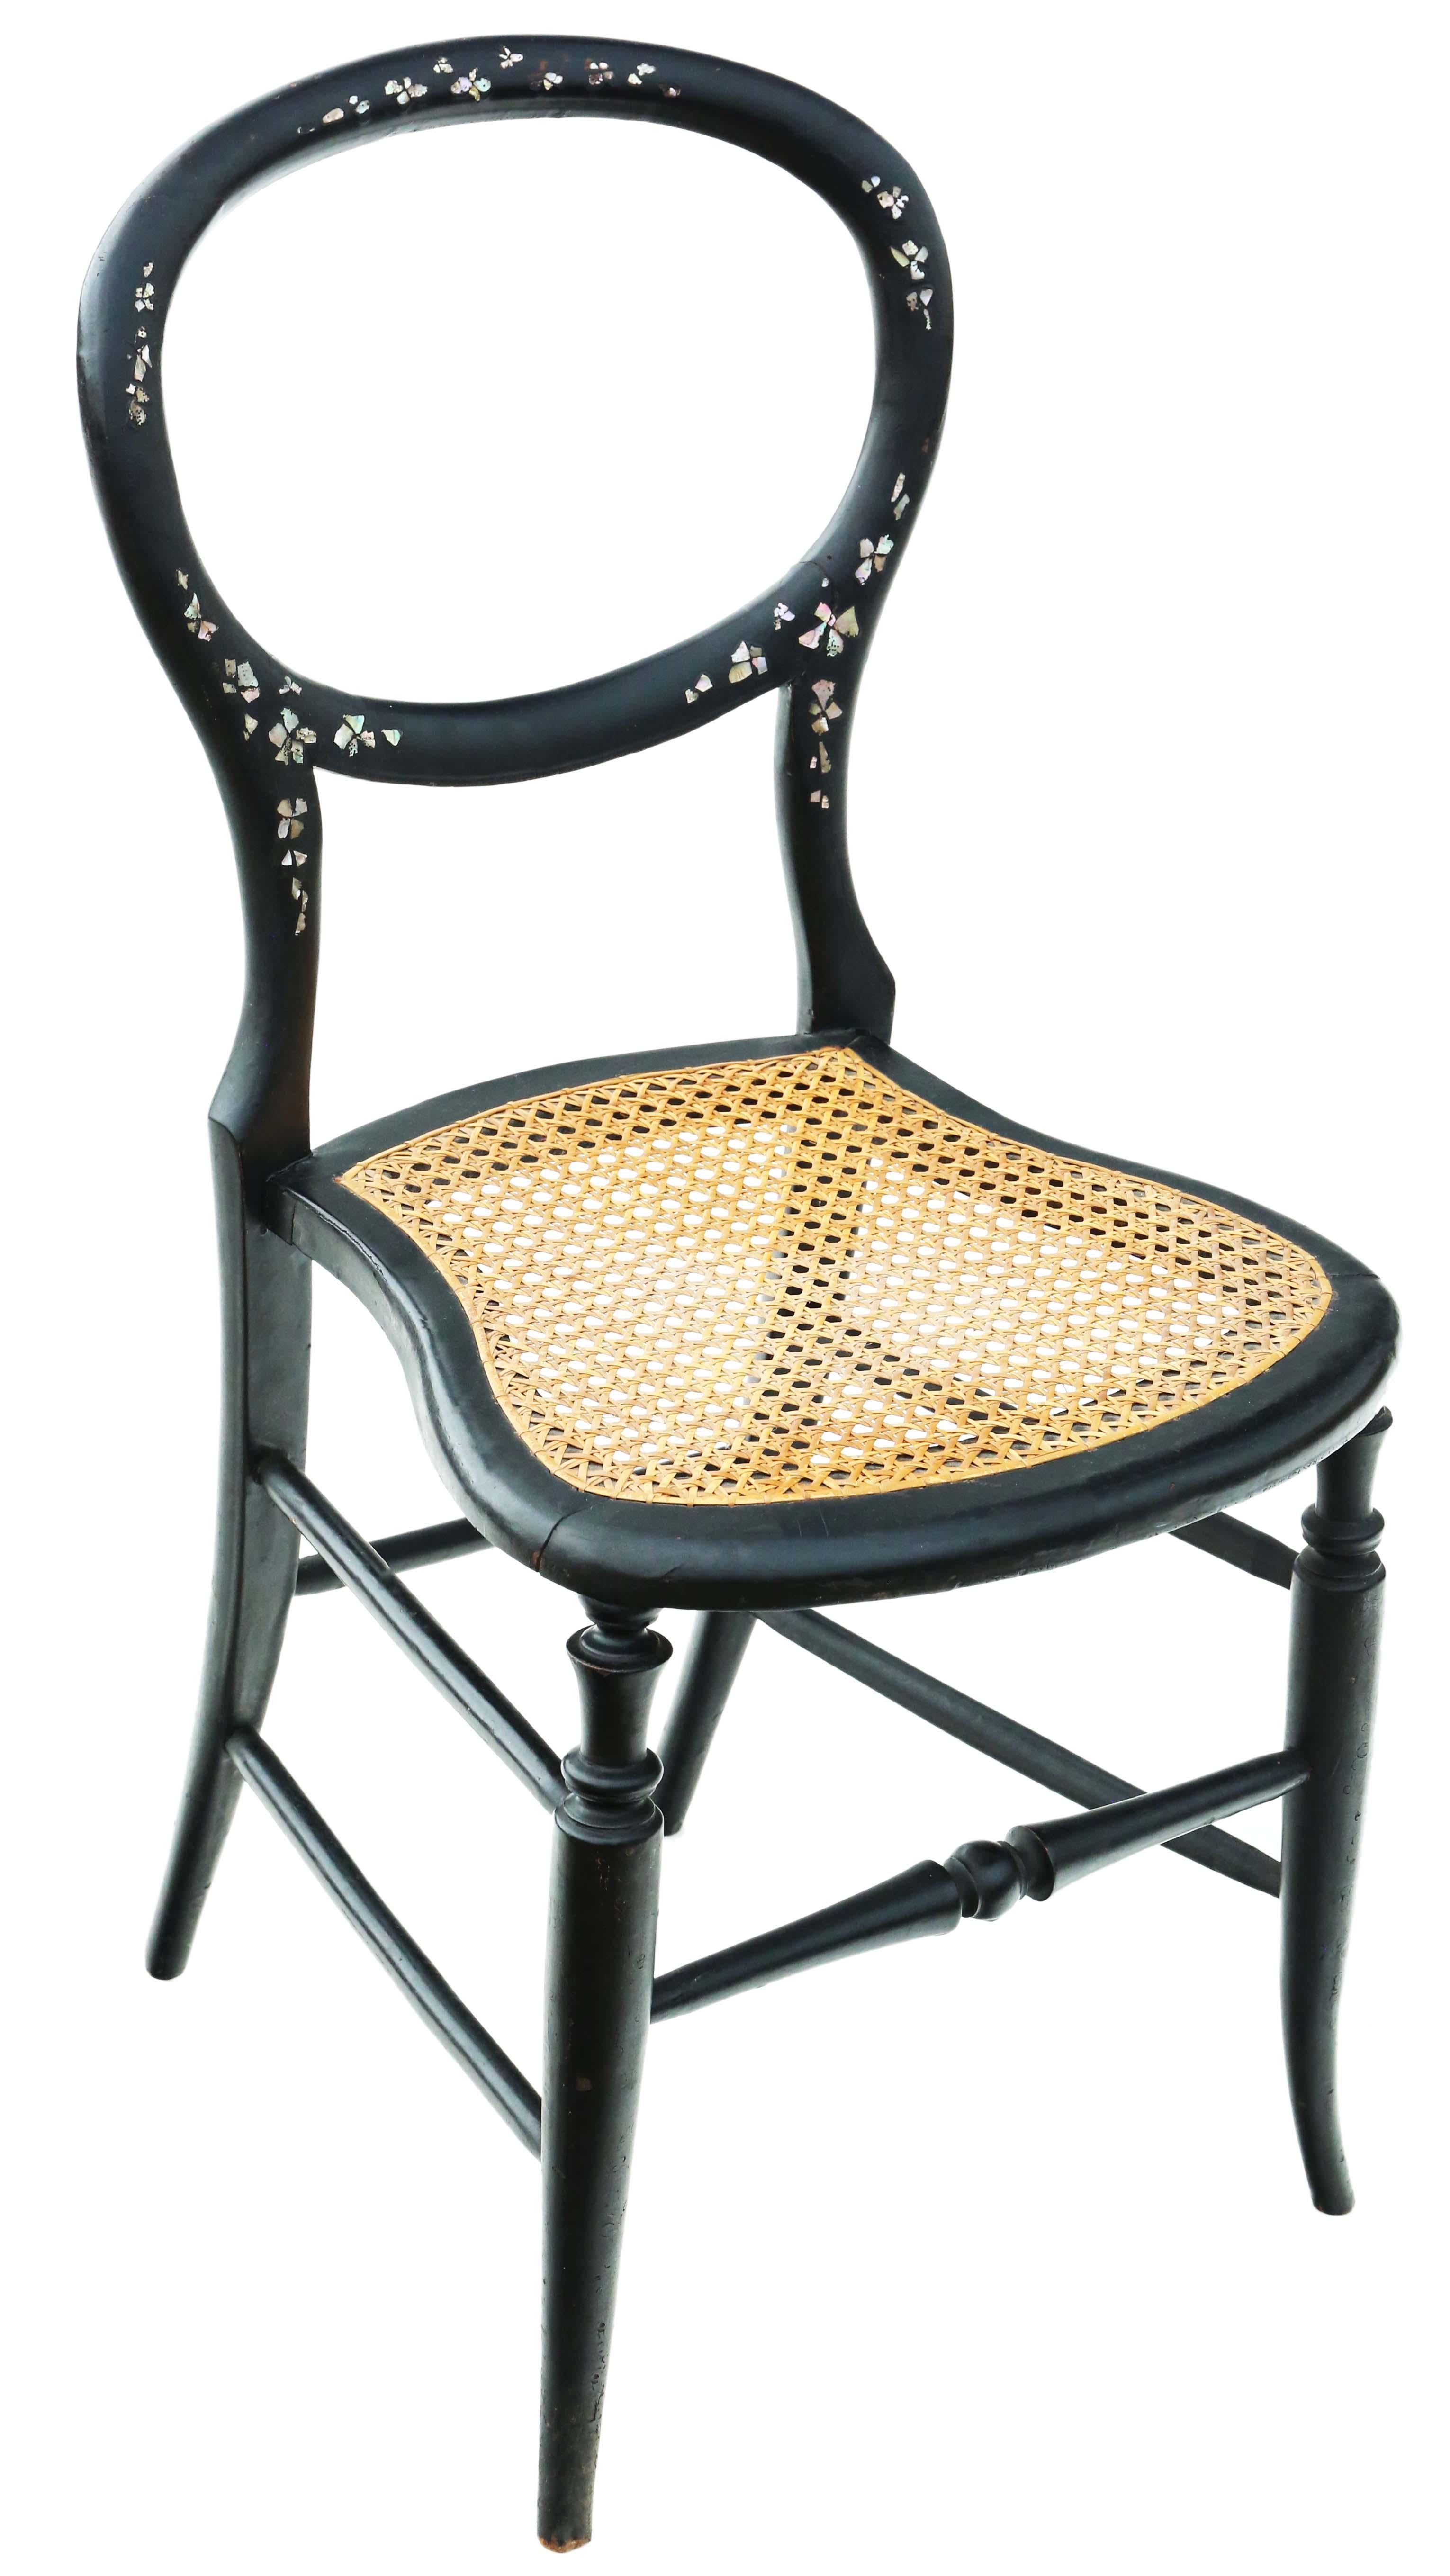 Antique rare Victorian black lacquer mother of pearl inlaid bedroom side chair.

Dates from C1900. Fantastic quality decorative piece, with amazing inlays.

No loose joints or woodworm.

The cane seat is in good order.

Overall maximum dimensions: